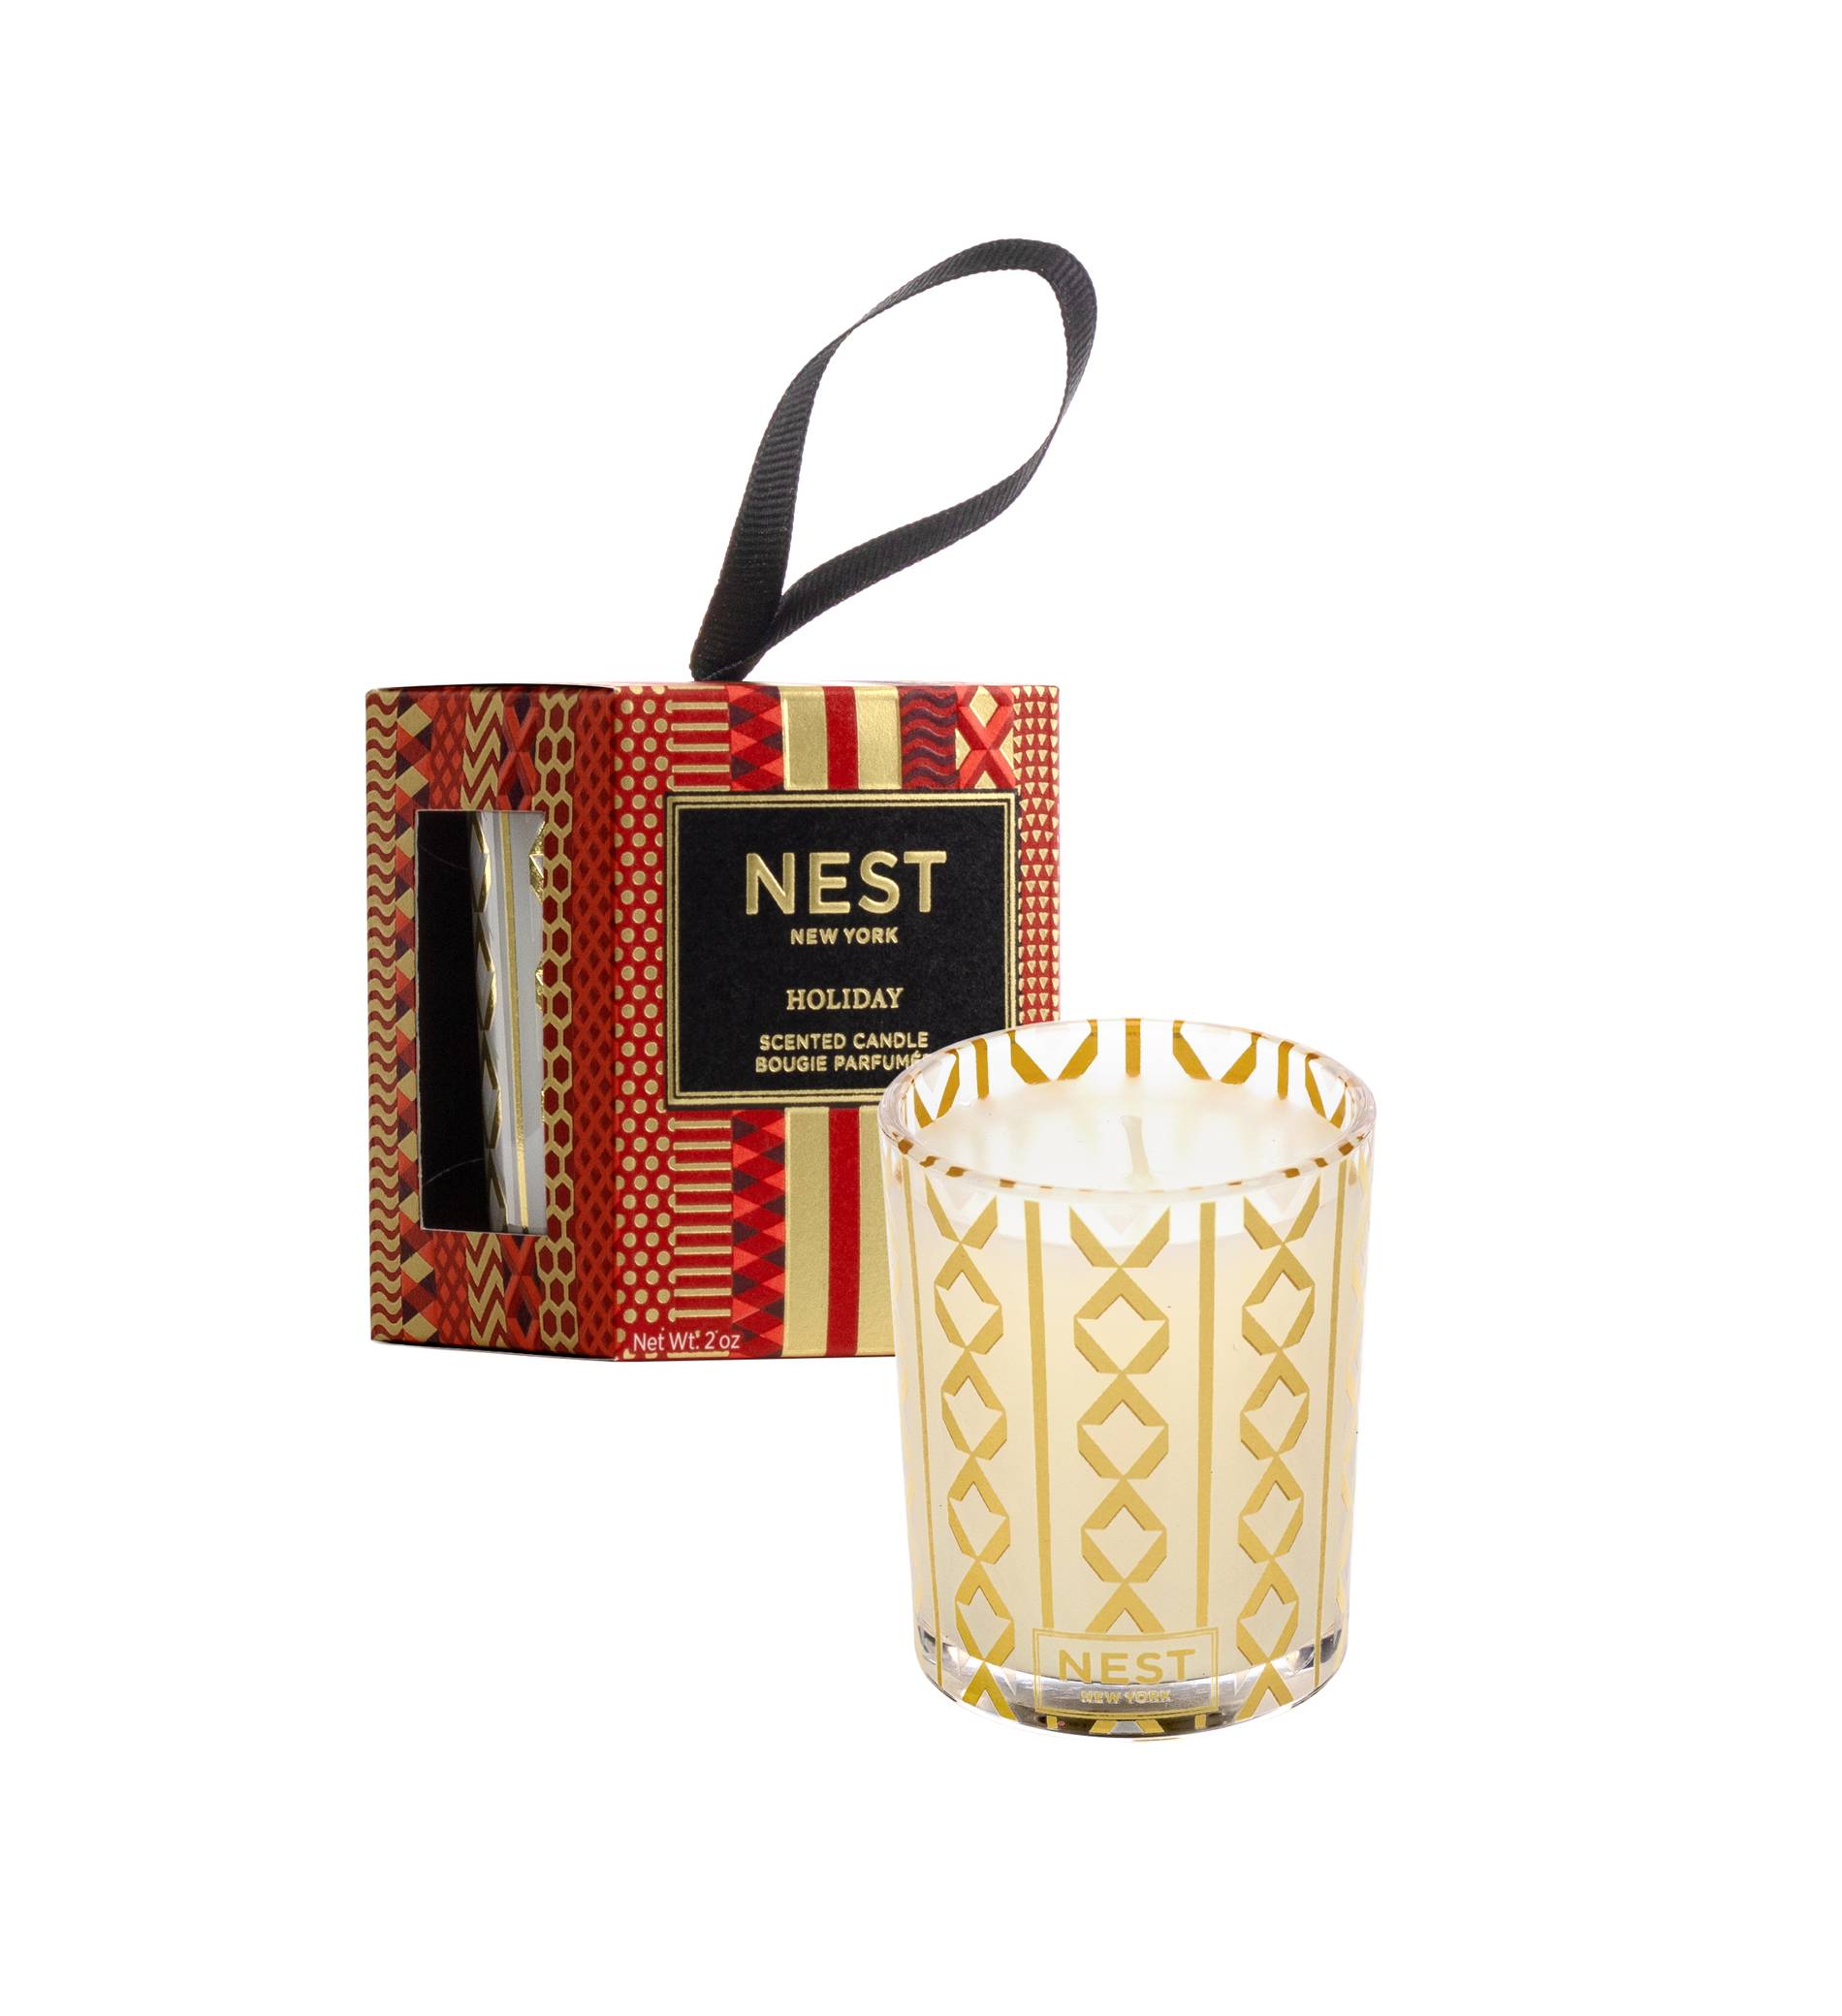 NEST Holiday Candle Scent Image